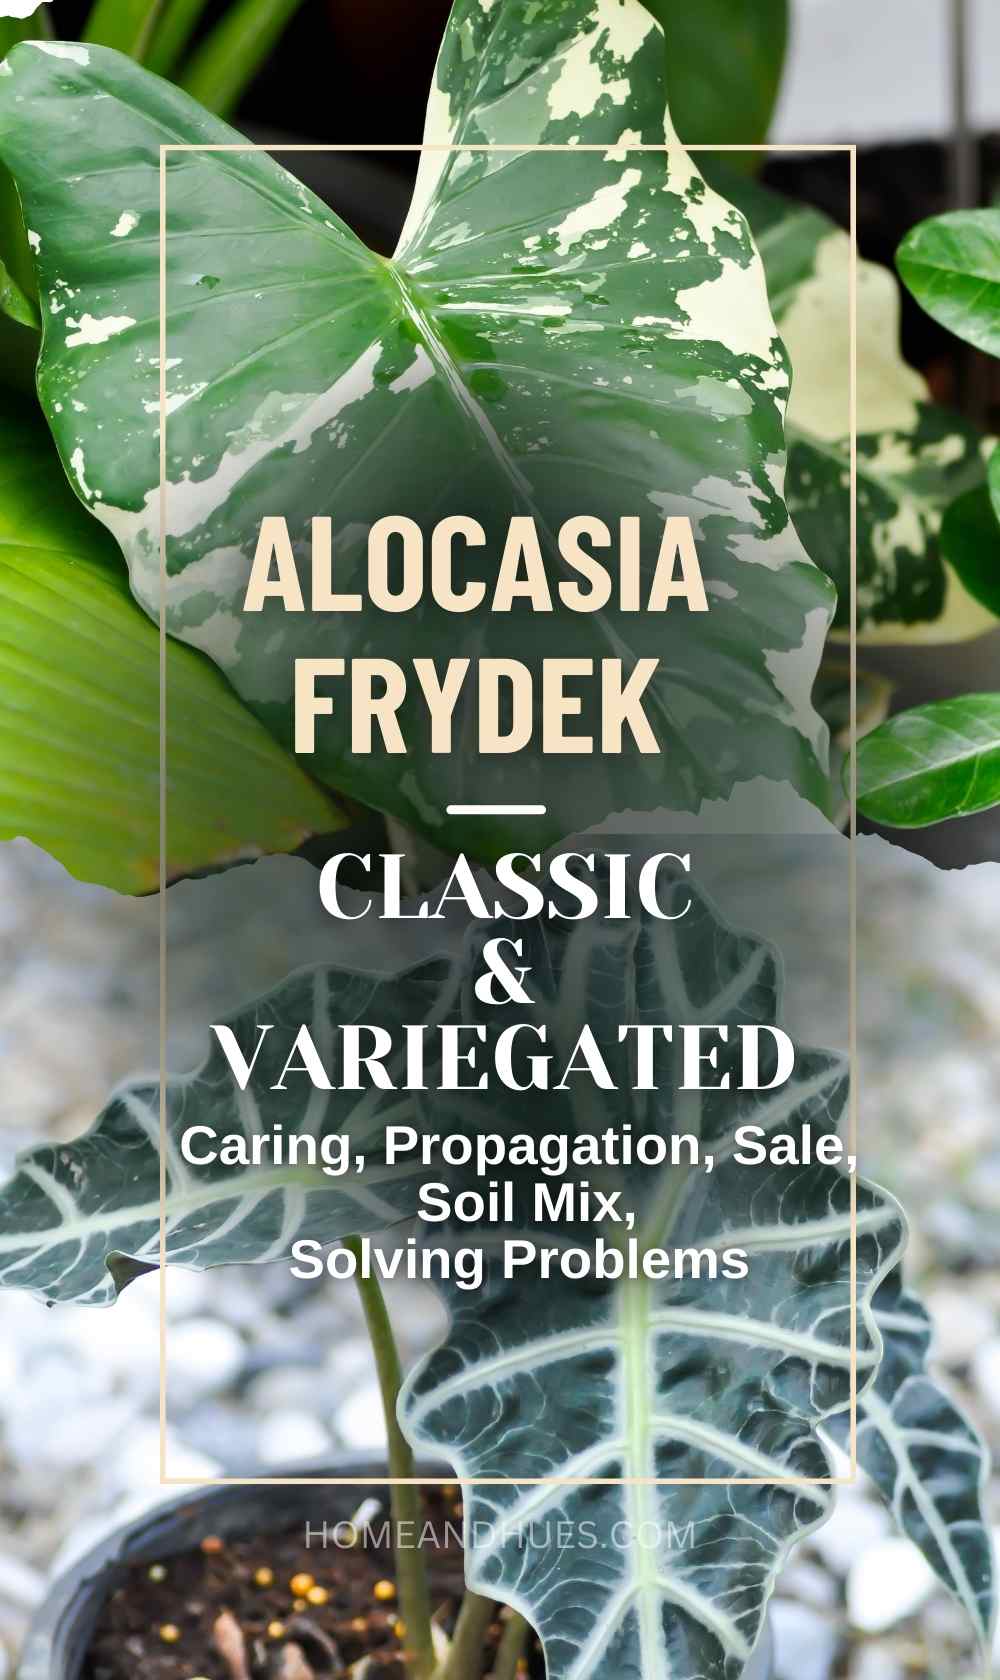 Essential tips for Alocasia Frydek care, including advice for the stunning Alocasia Frydek Variegated. Learn how to maintain the perfect environment for your Frydek plant, ensuring its striking variegata patterns thrive. This guide simplifies plant care, like water, light and soil requirements, making it easy to keep your Alocasia healthy and vibrant. Perfect for beginners and seasoned plant enthusiasts alike.